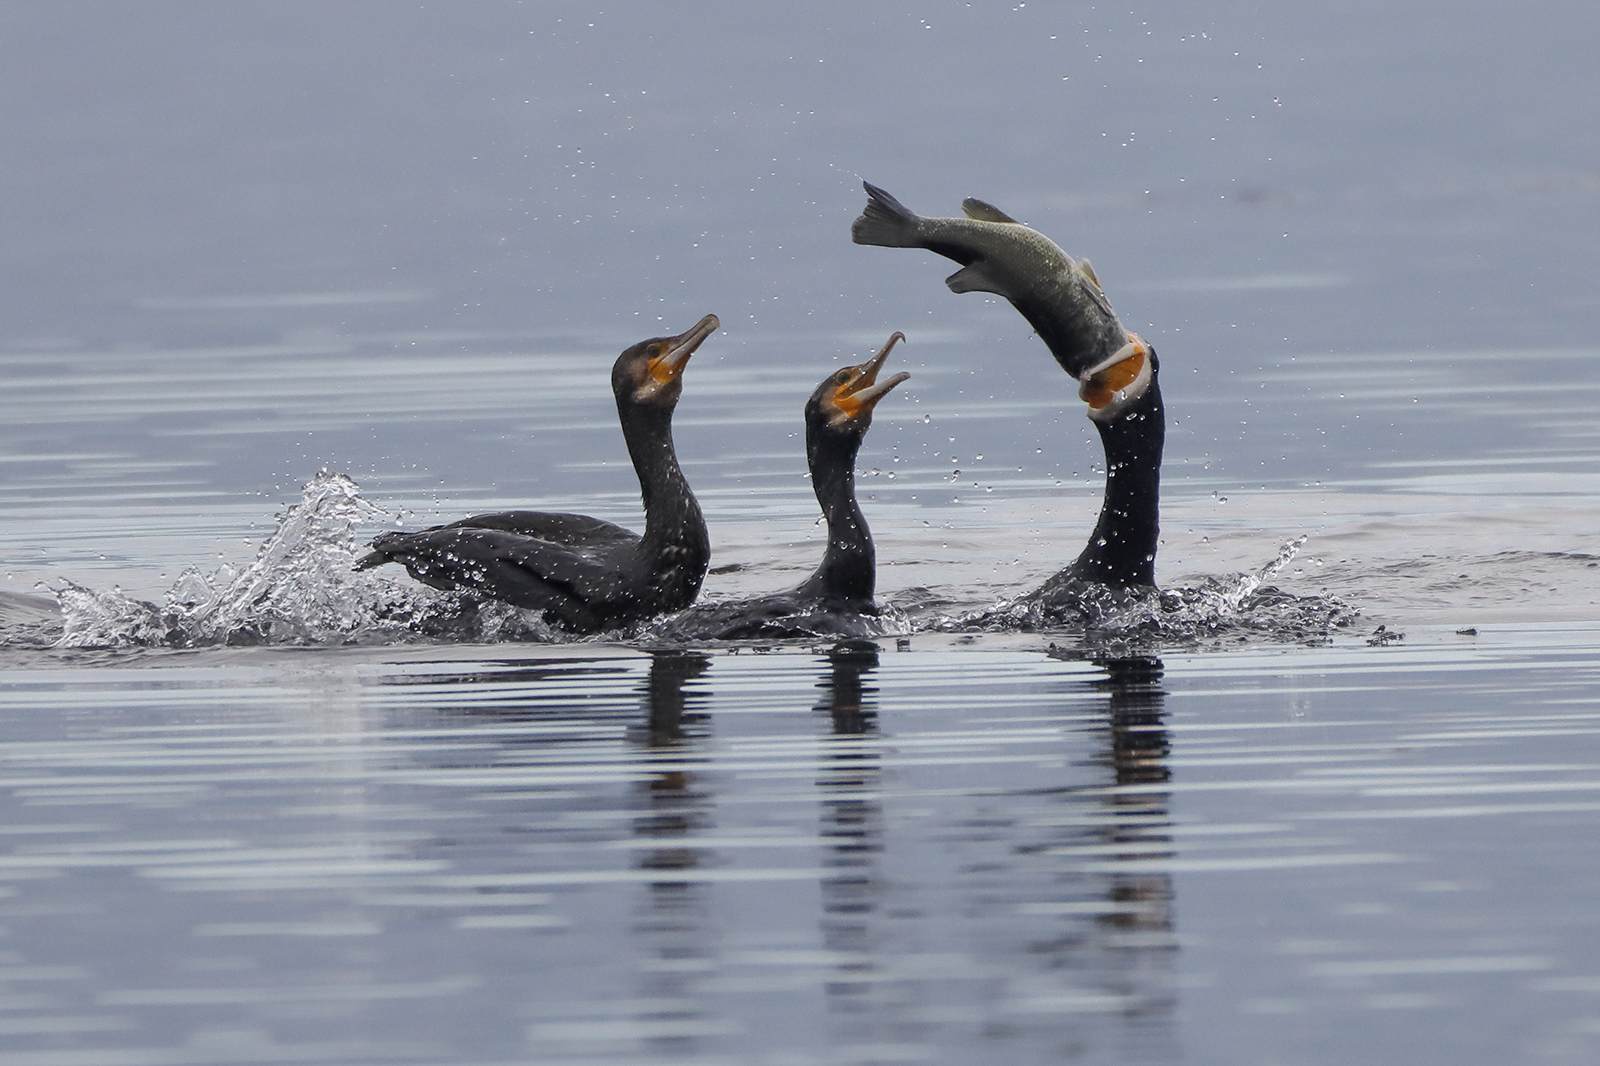 cormorants struggling with an exaggerated prey...